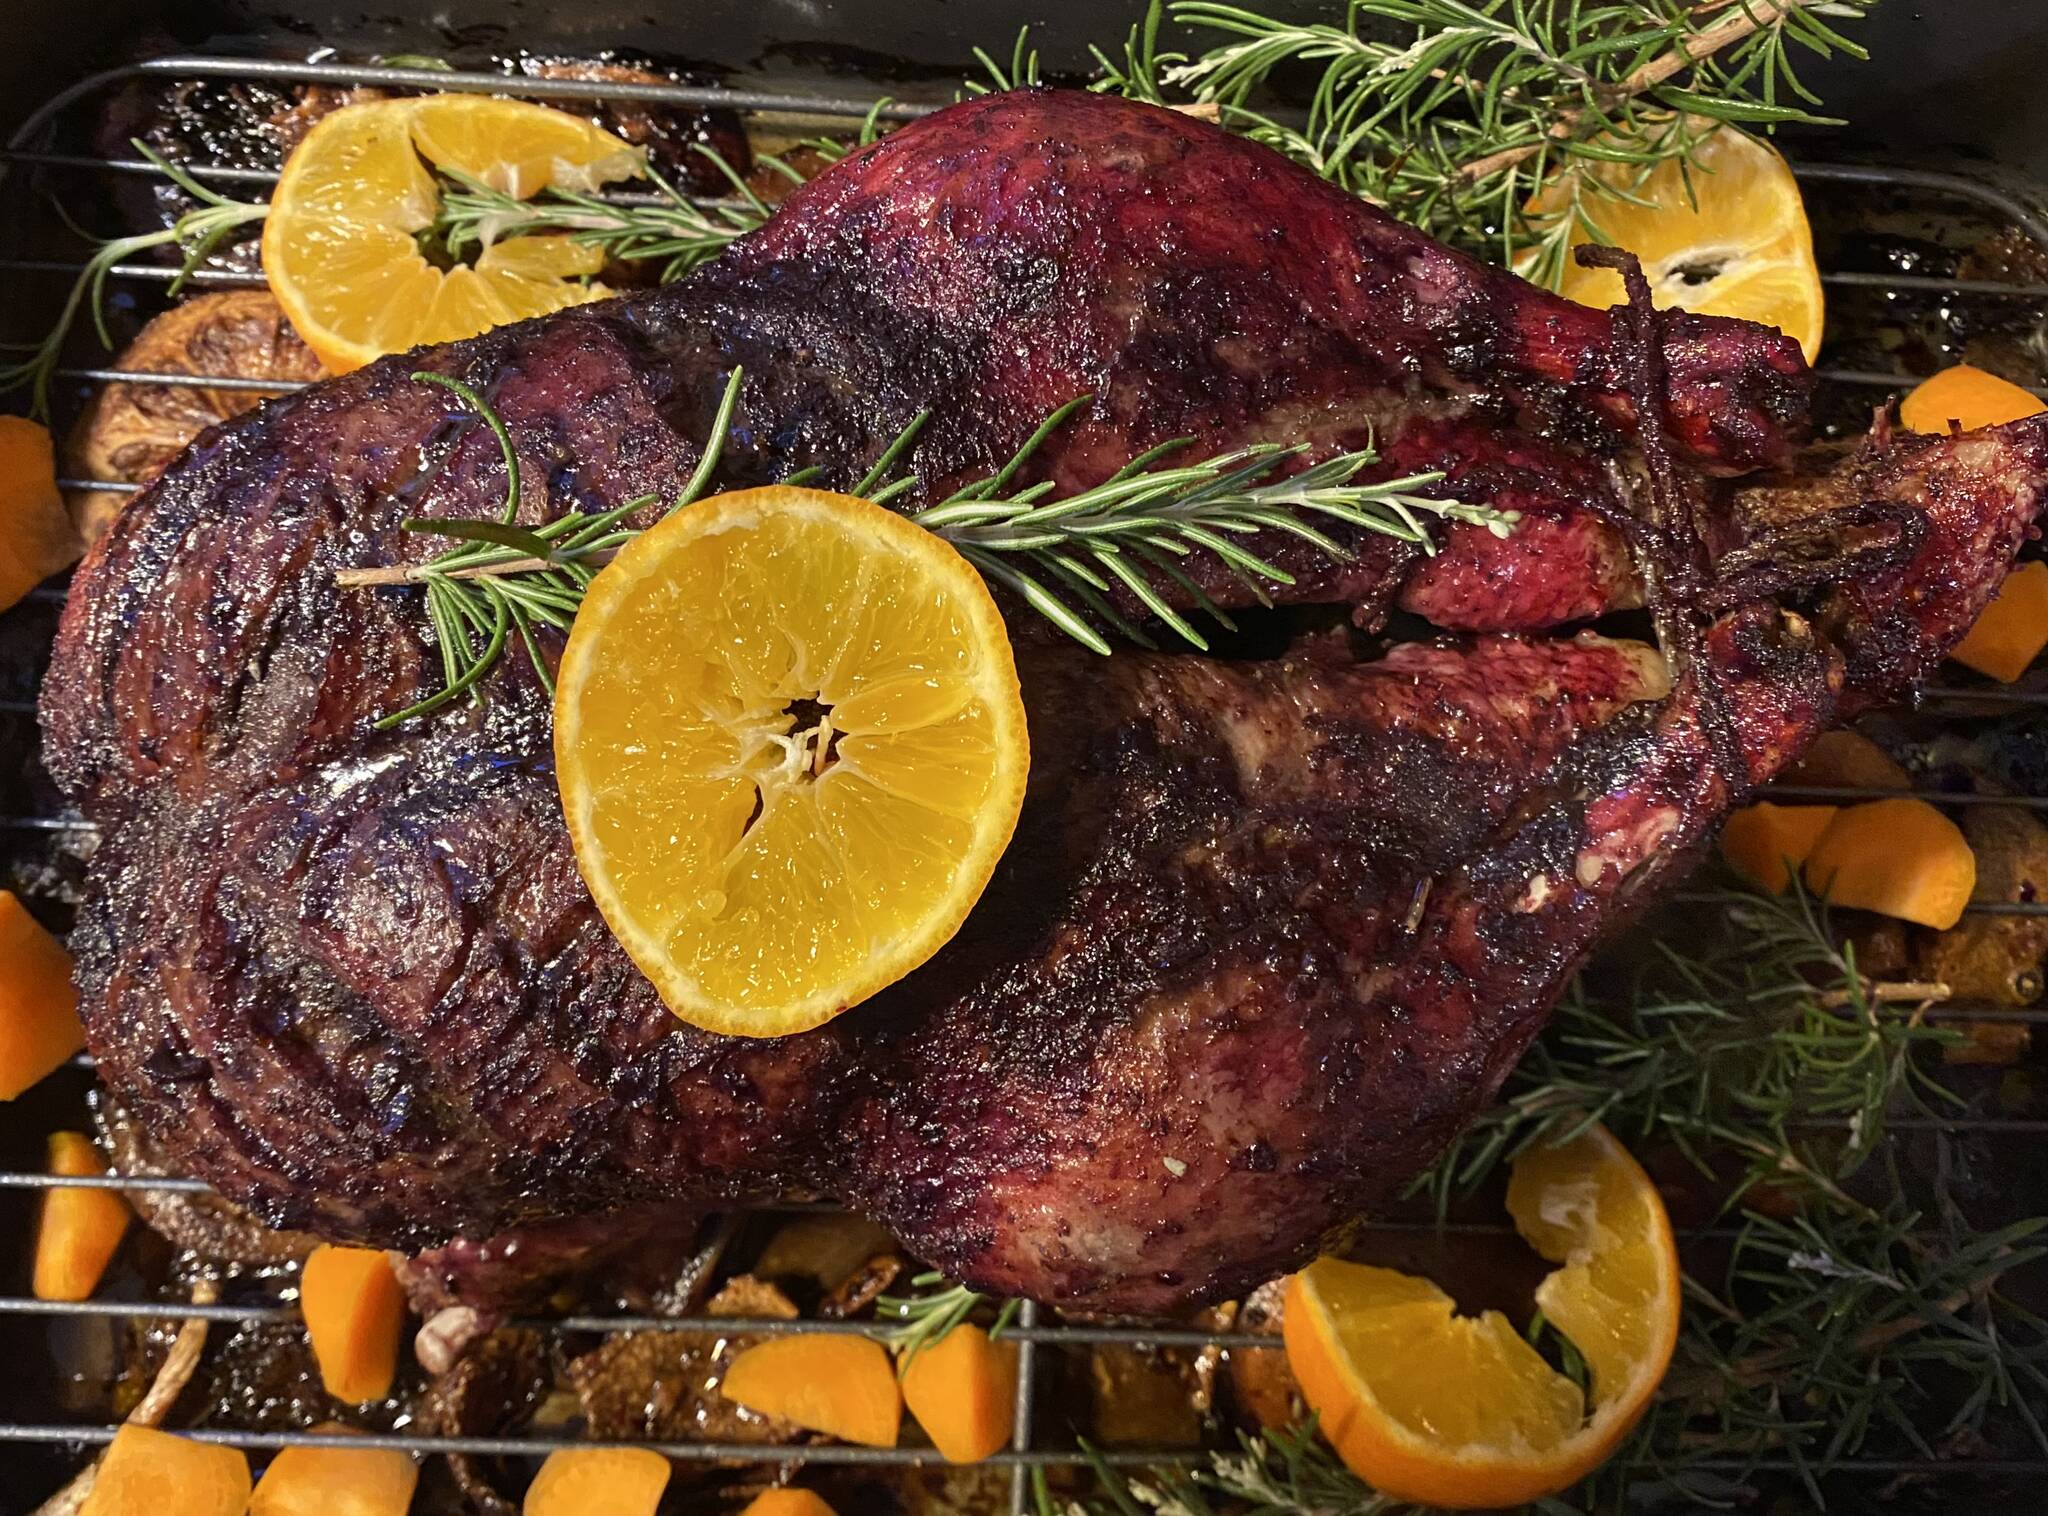 Roasted duck is served with rosemary and oranges. (Photo by Tressa Dale/Peninsula Clarion)